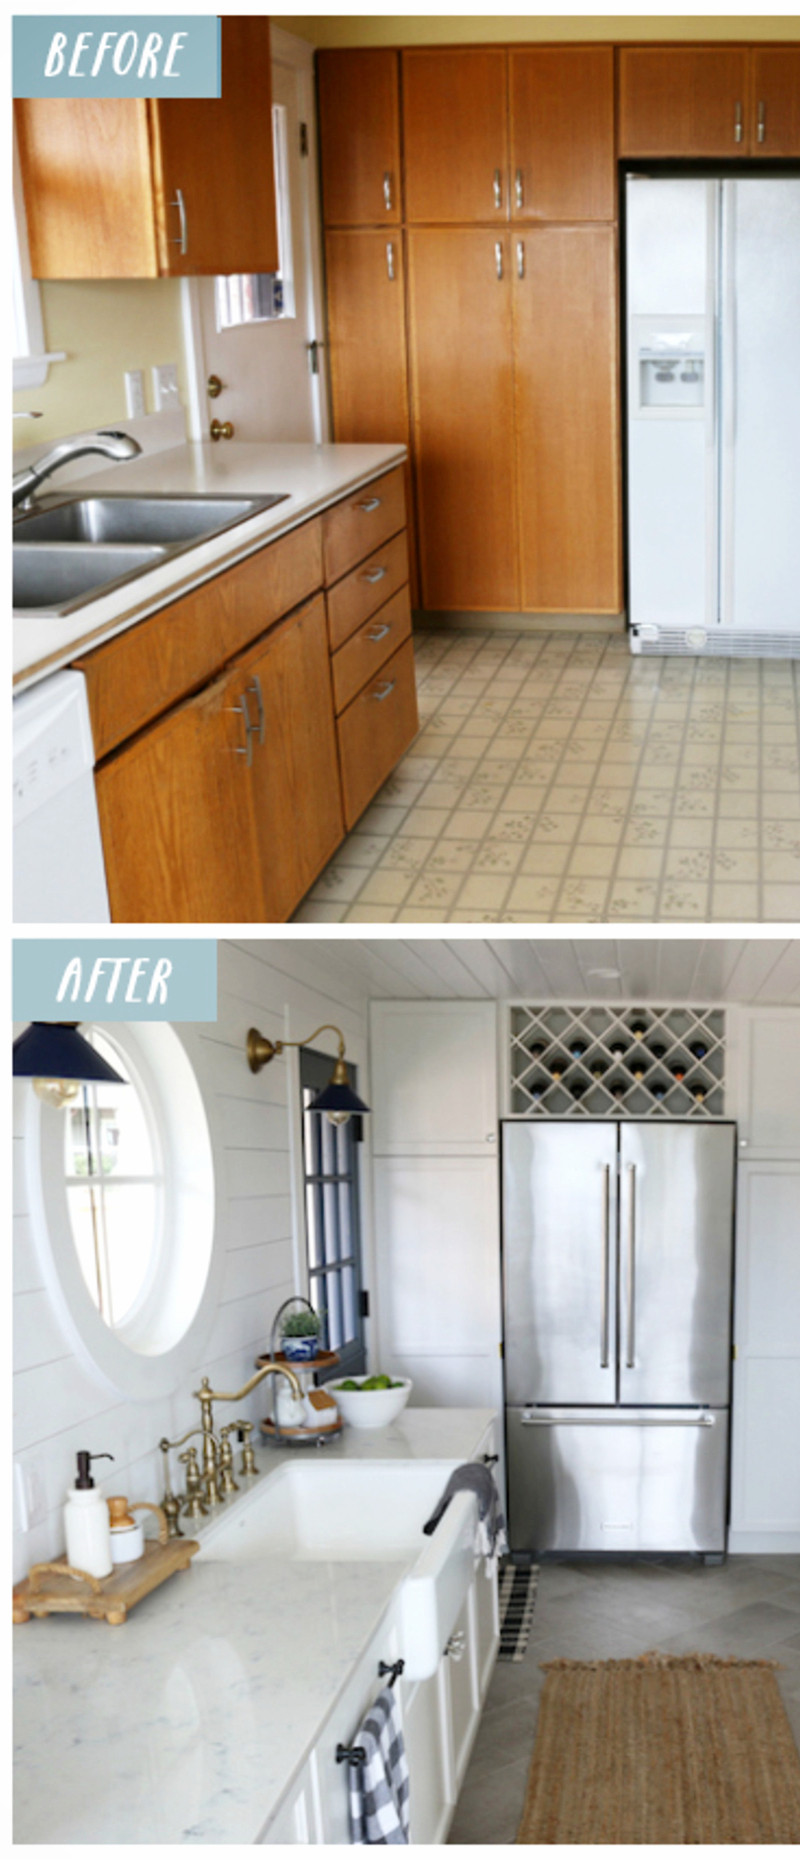 Small Kitchen Makeovers
 Small Kitchen Remodels Before and After PICTURES To Drool